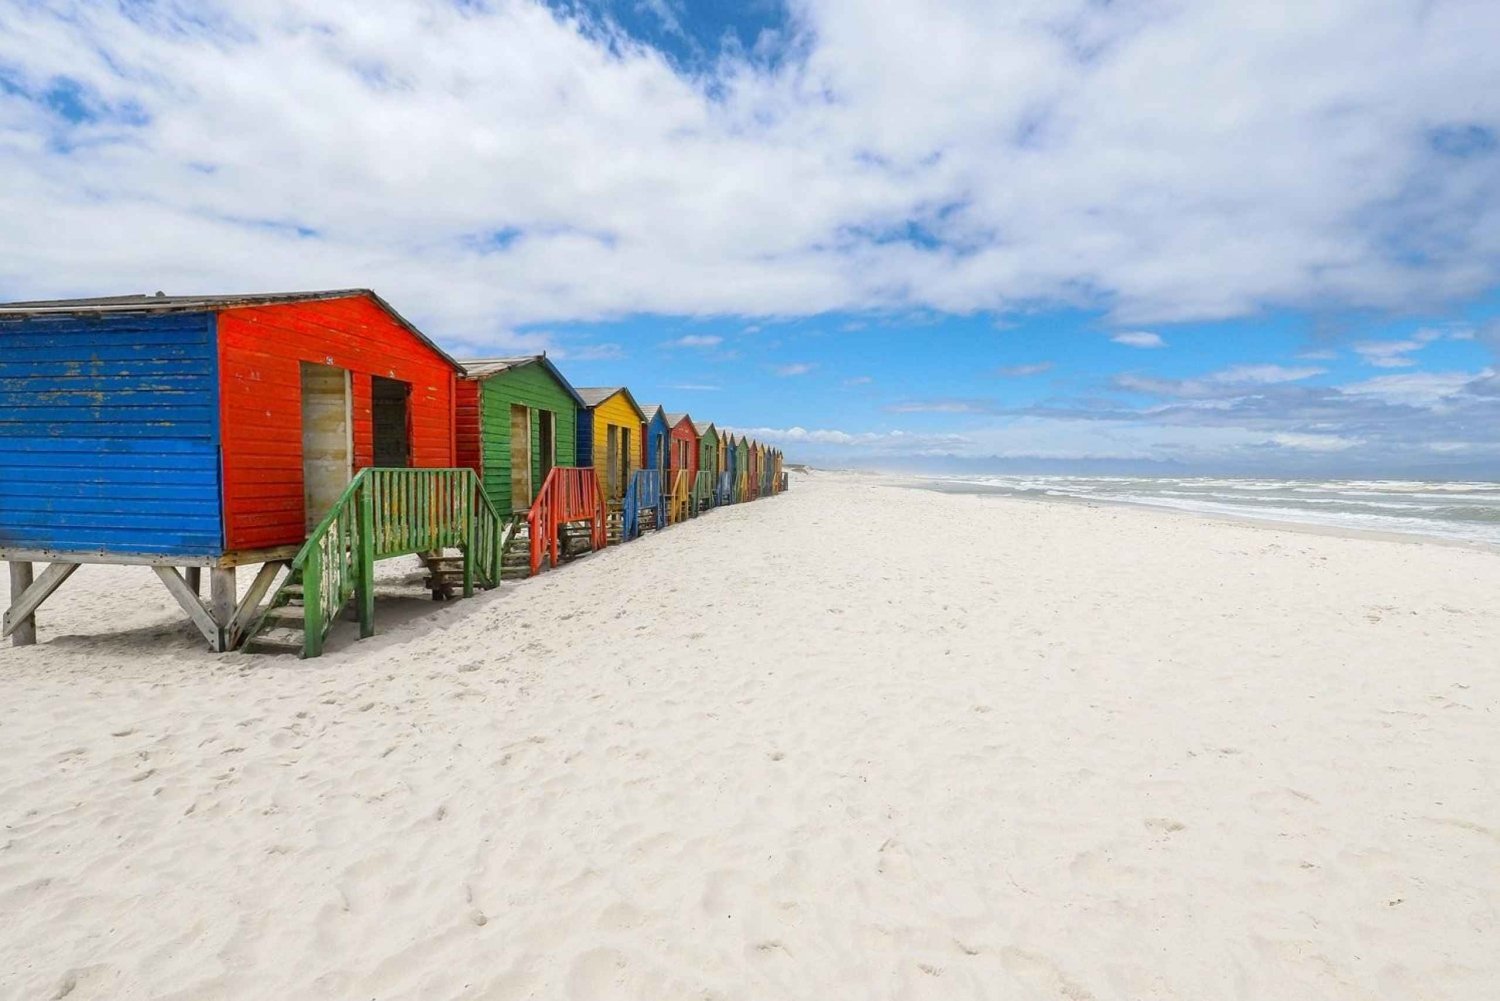 False Bay by Train Day Tour: Explore Muizenberg and Kalk Bay